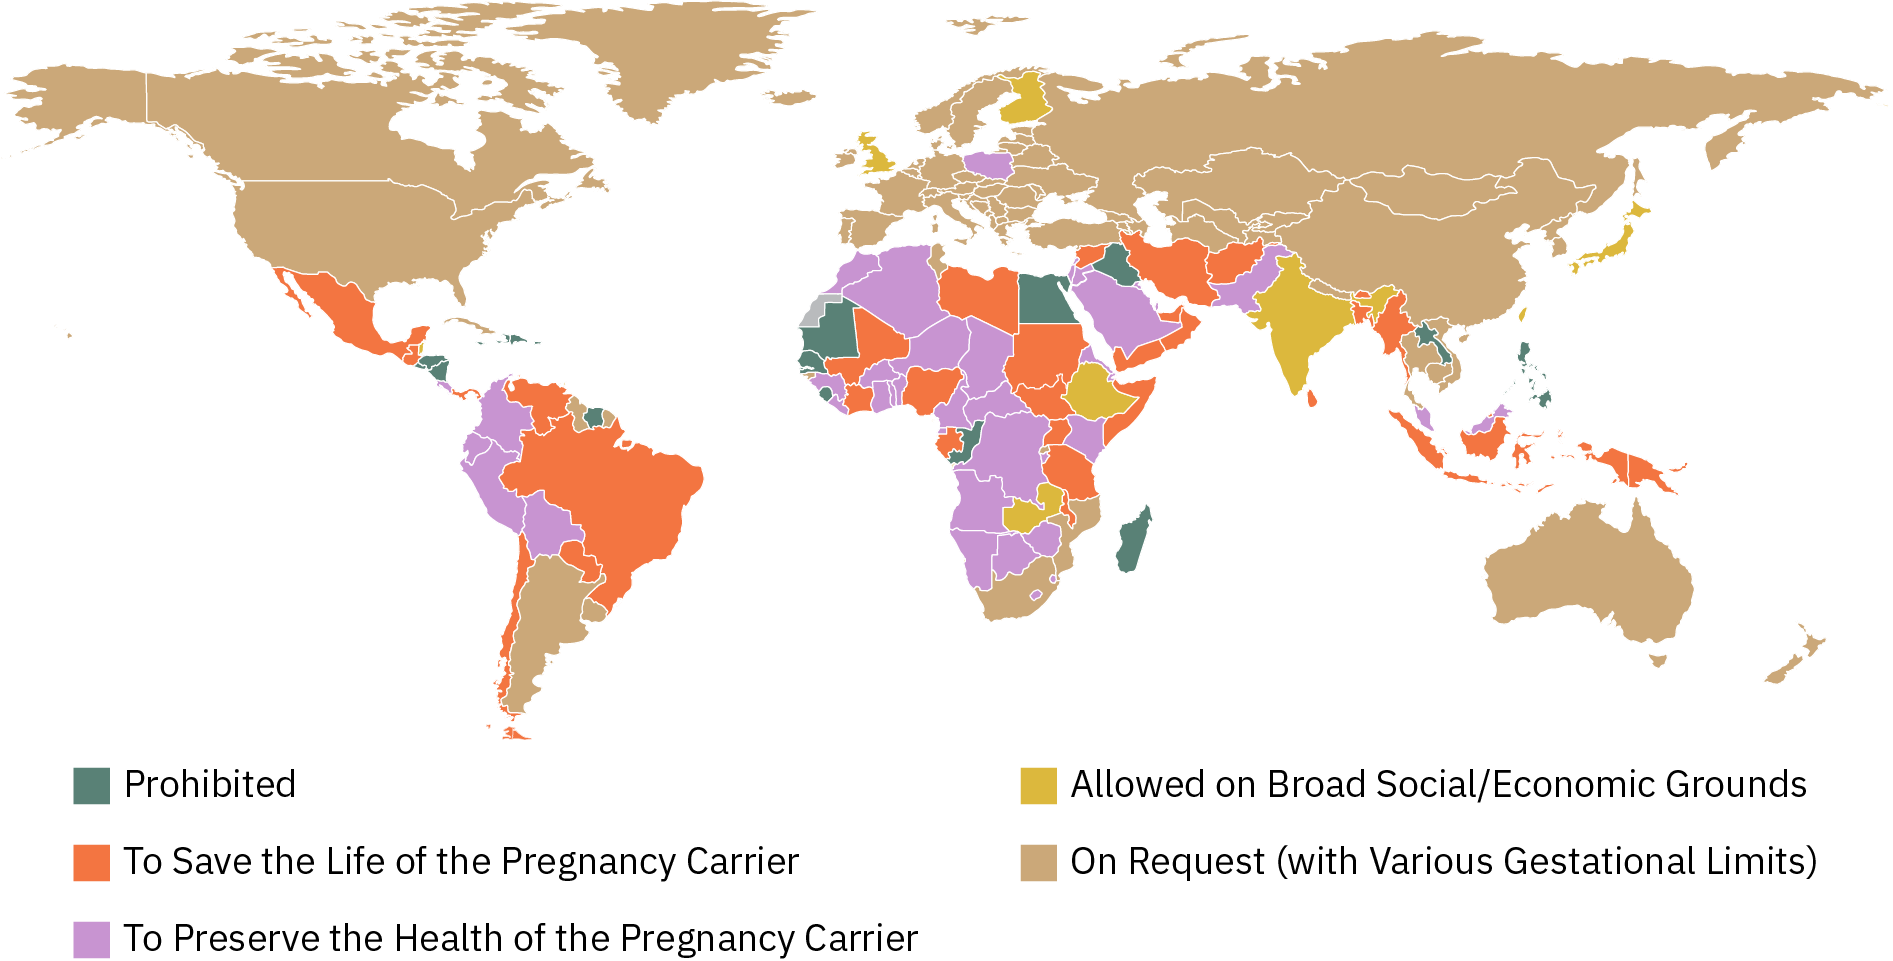 A map of the world with shading to indicate the legality of abortion. In the following nations/regions abortion is available on request, with various gestational limits: Russia, Turkey, China, Australia, most of Europe, Canada, the United States, Argentina, and South Africa. In the following nations/regions abortion is allowed on broad social/economic grounds: India, Japan, Finland, England, Ethiopia, Democratic Republic of the Congo. In the following nations/regions, abortion is allowed to save or preserve the health of the pregnancy carrier: most of Africa, most of South America, most of the Middle East, Mexico, and Poland. In the following nations/regions, abortion is prohibited entirely: Egypt, Iran, the Philippines, portions of Africa, potions of Central America.